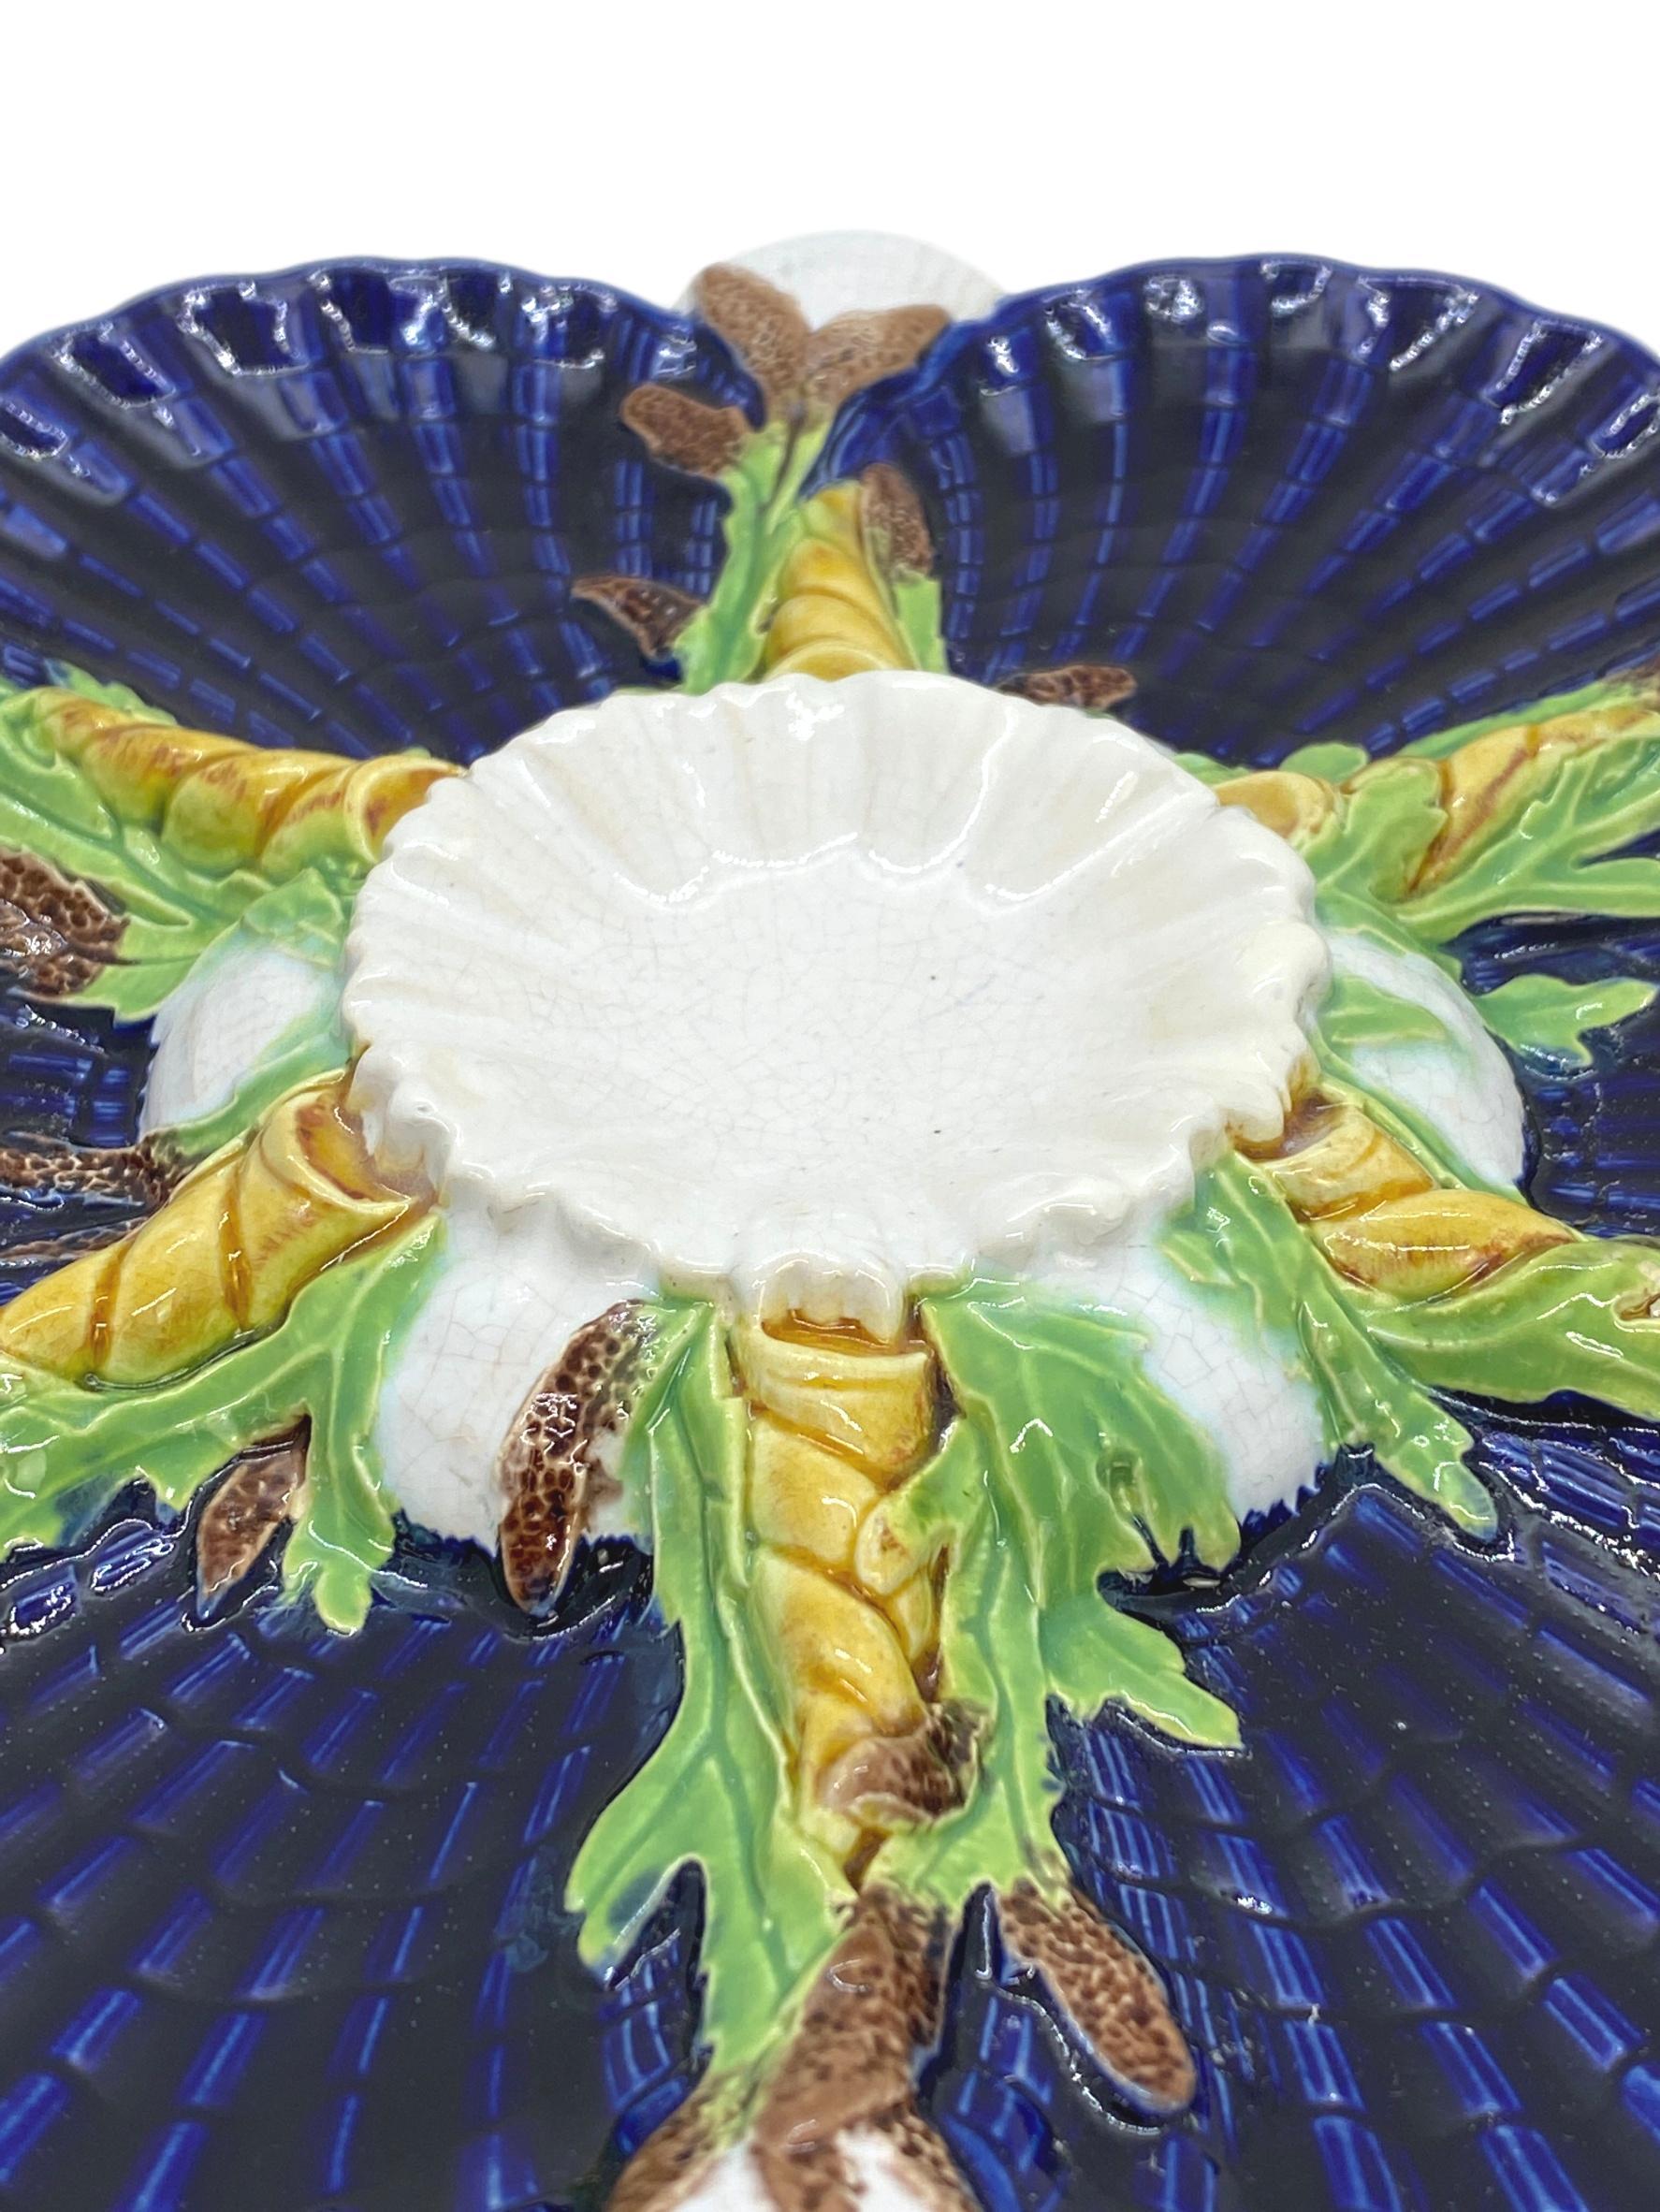 Late 19th Century George Jones Majolica Cobalt Blue Oyster Plate, English, Dated 1878